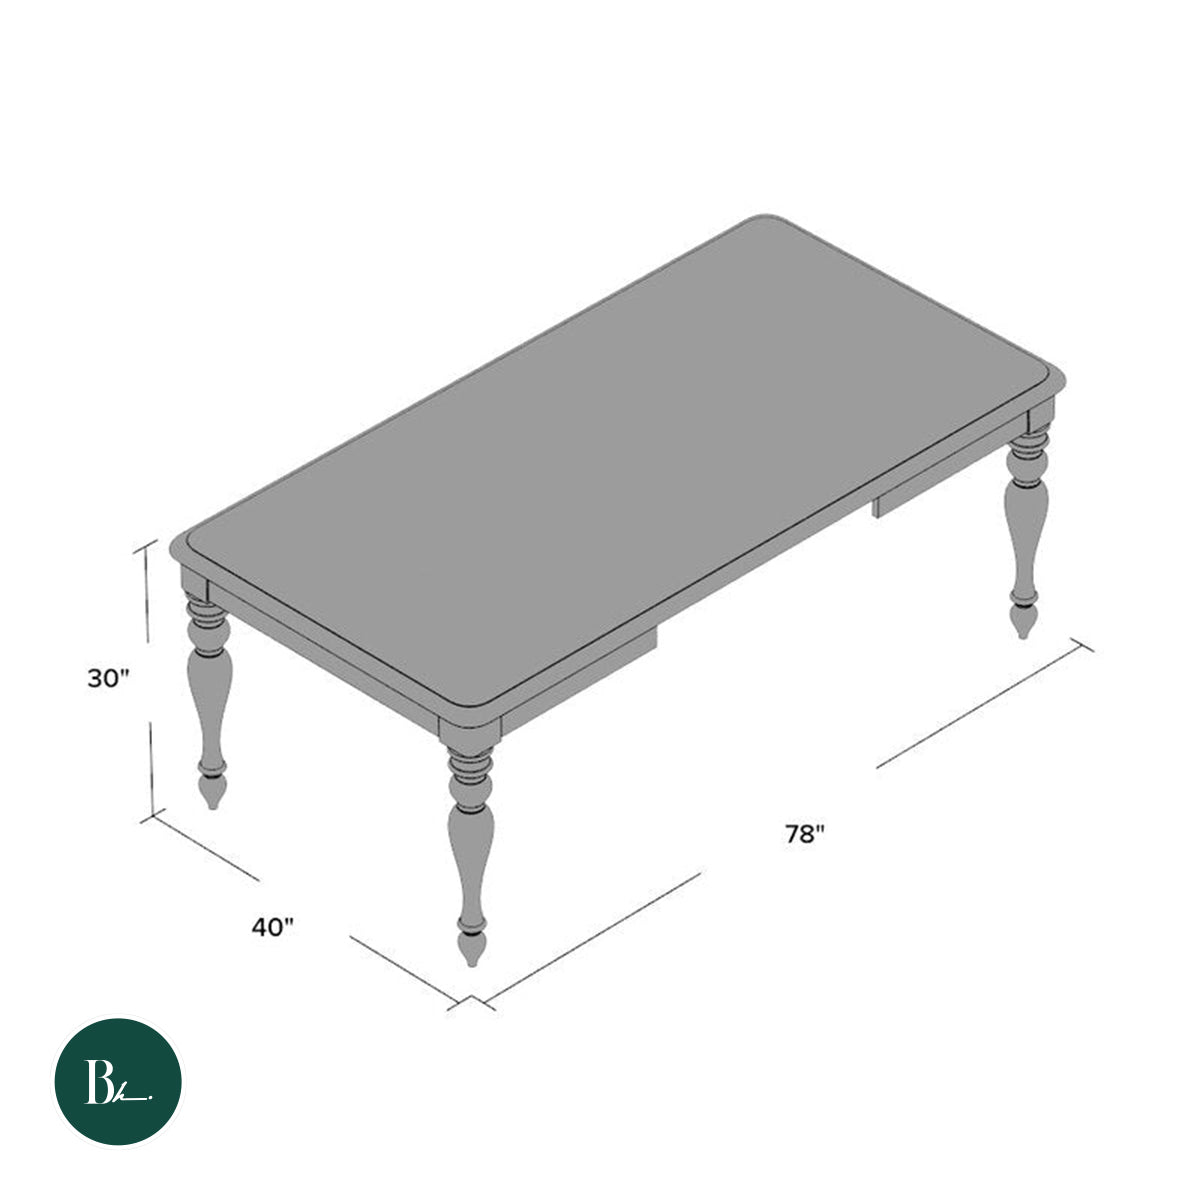 Alantae Extendable Dining Table by Bahtash Homes